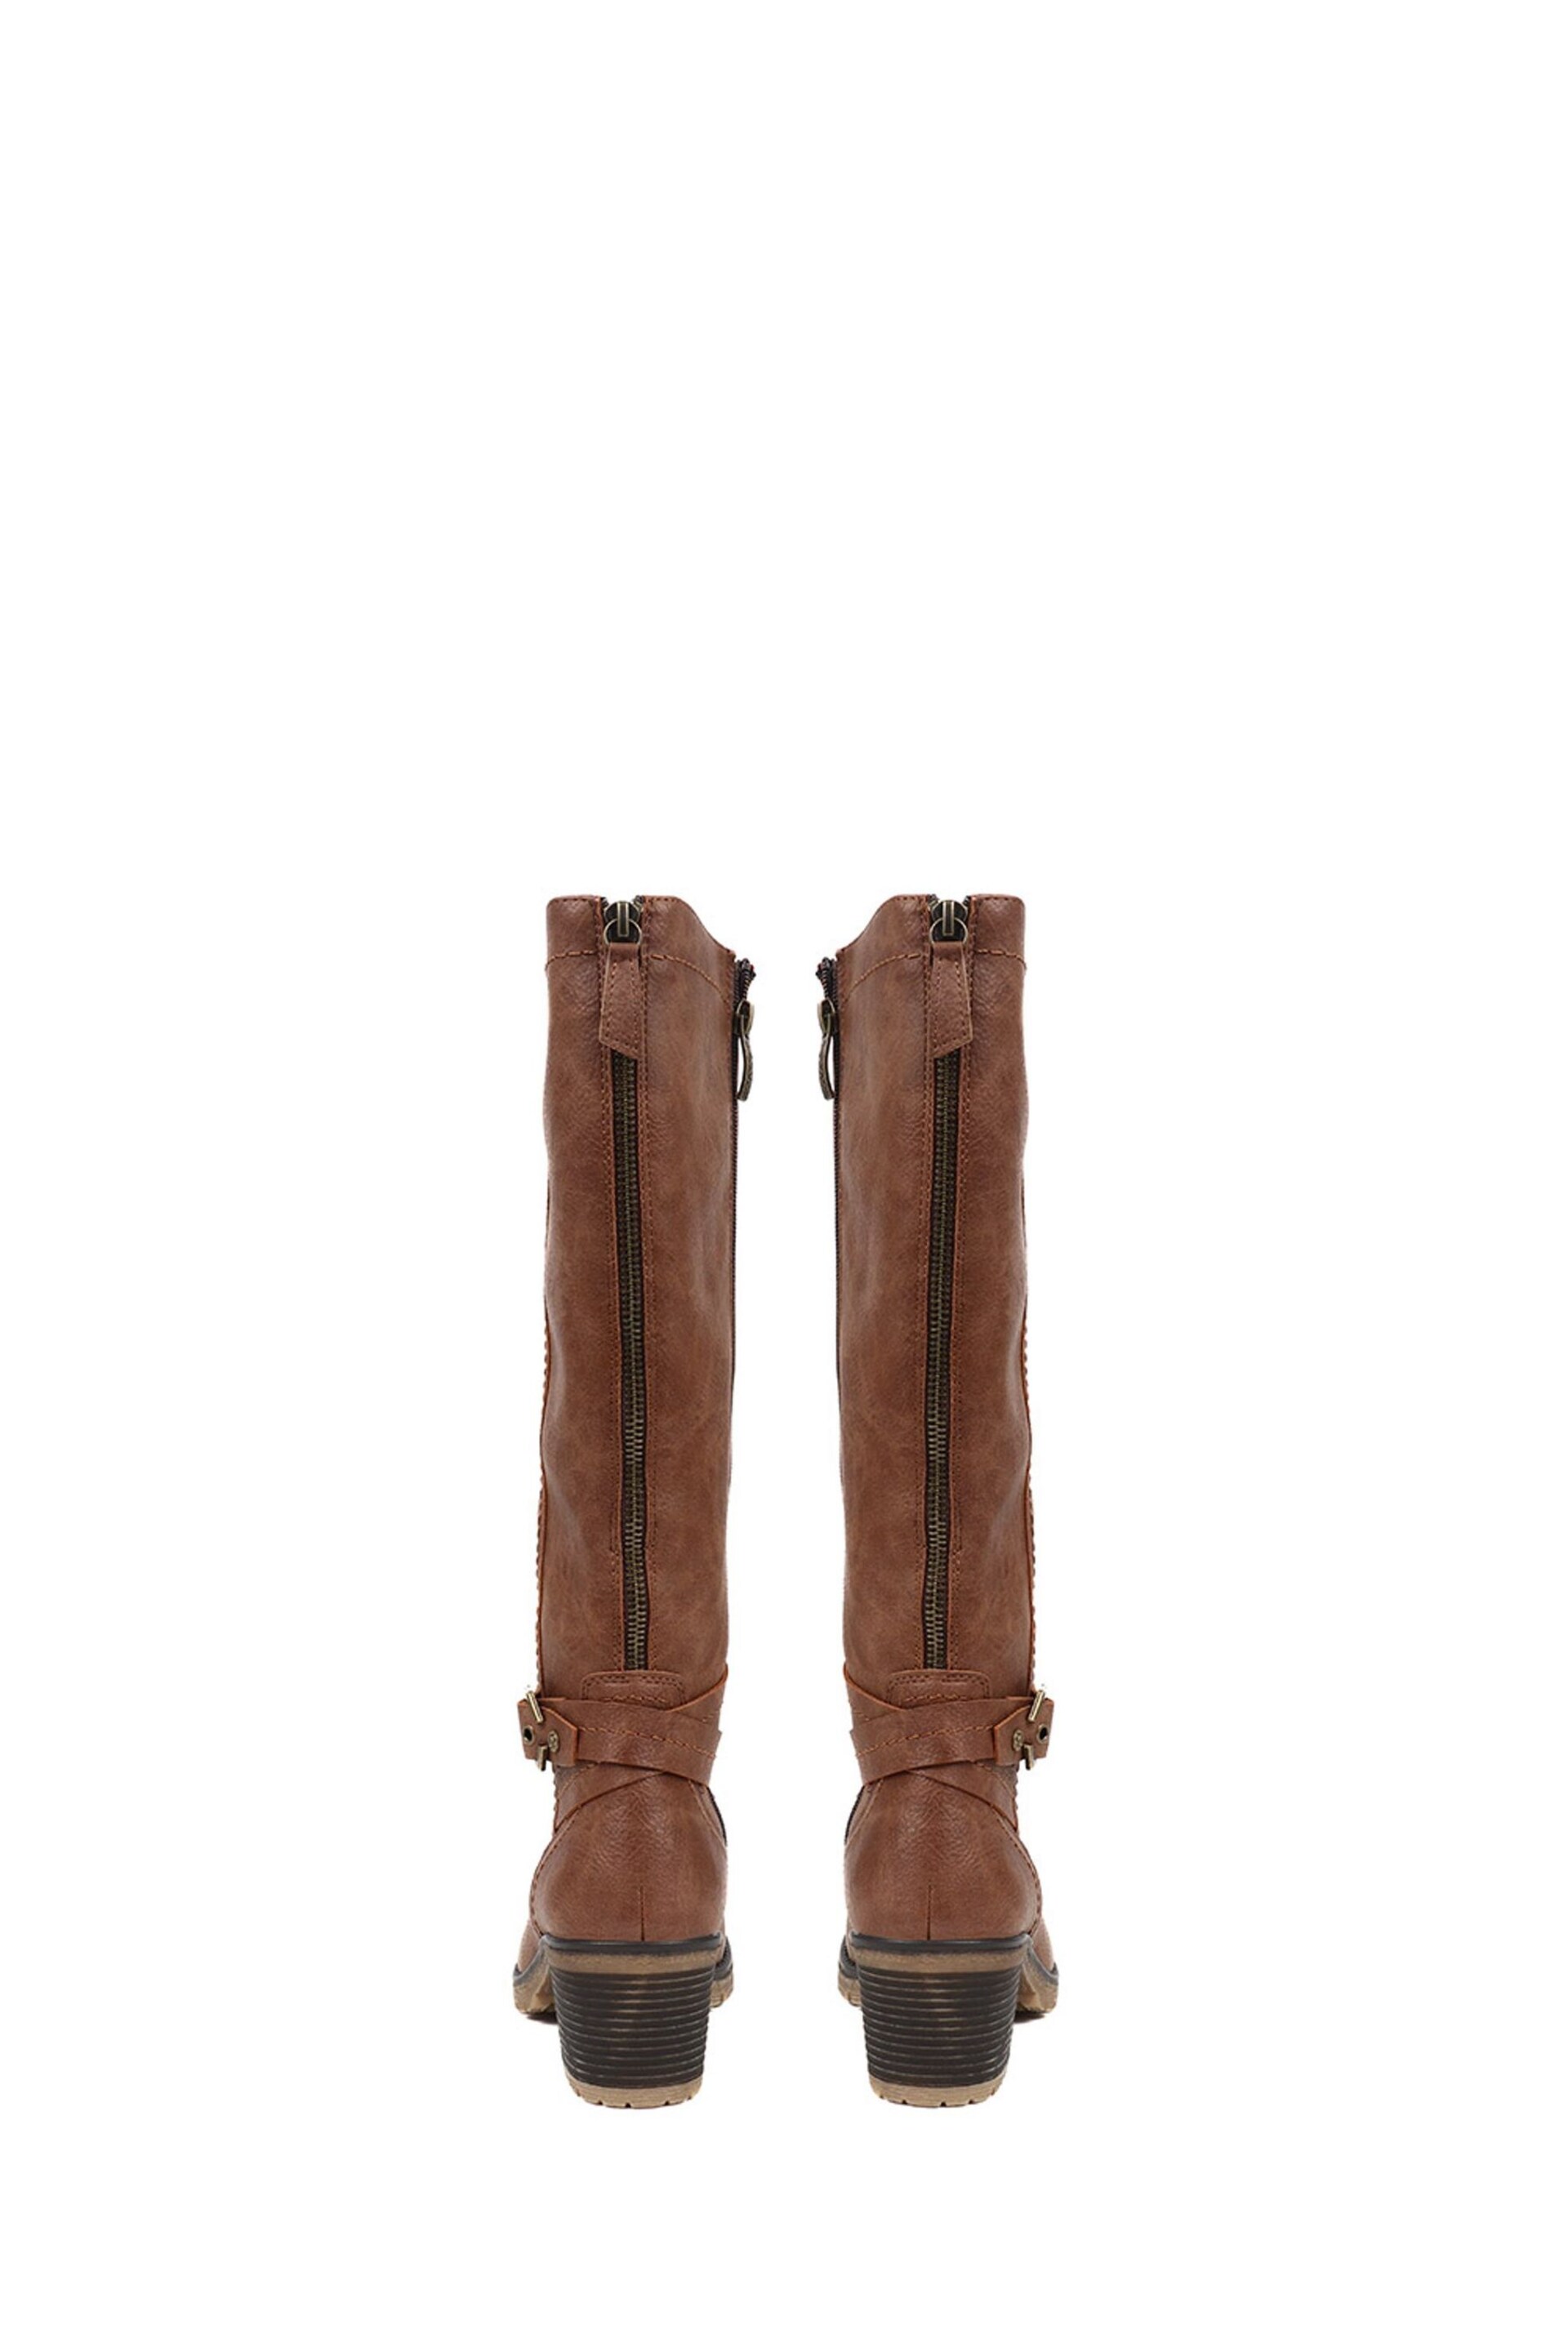 Pavers Heeled Riding Boots - Image 3 of 5